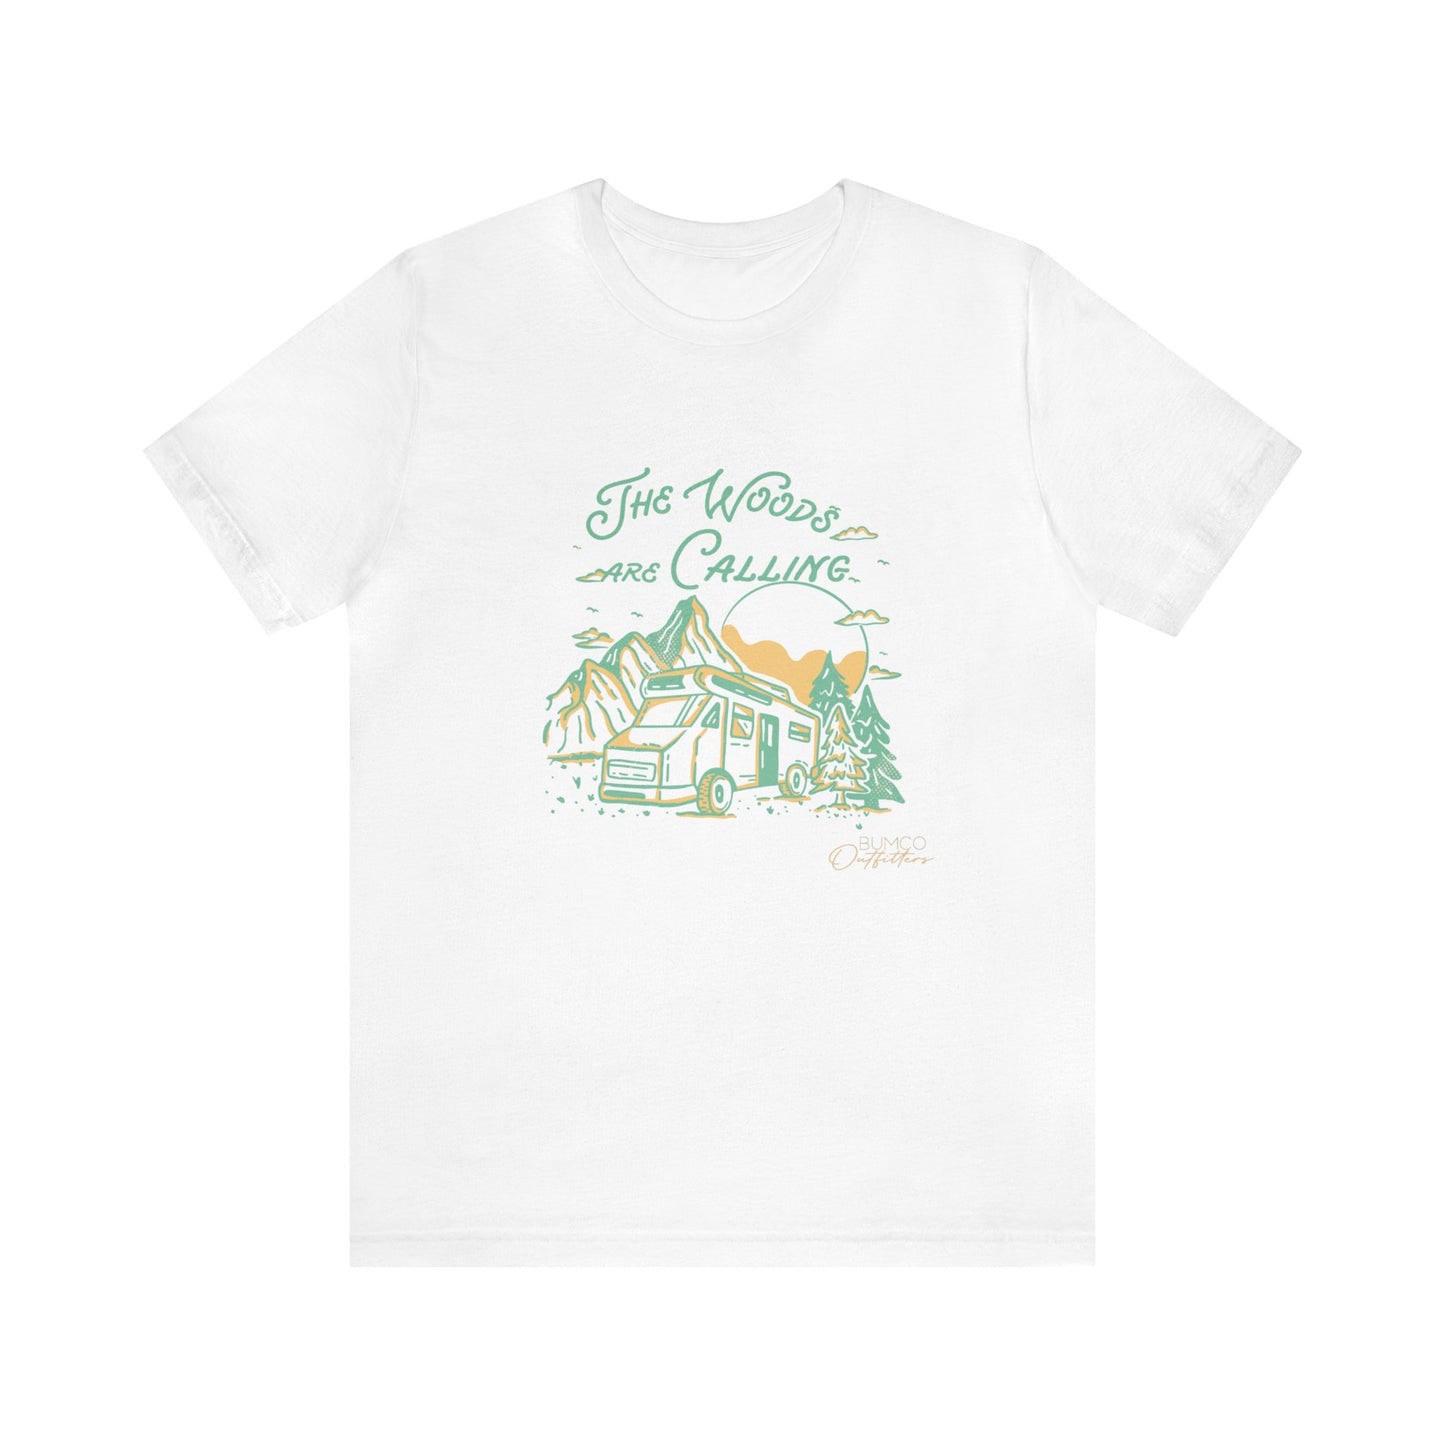 Women's The Woods are Calling Tee